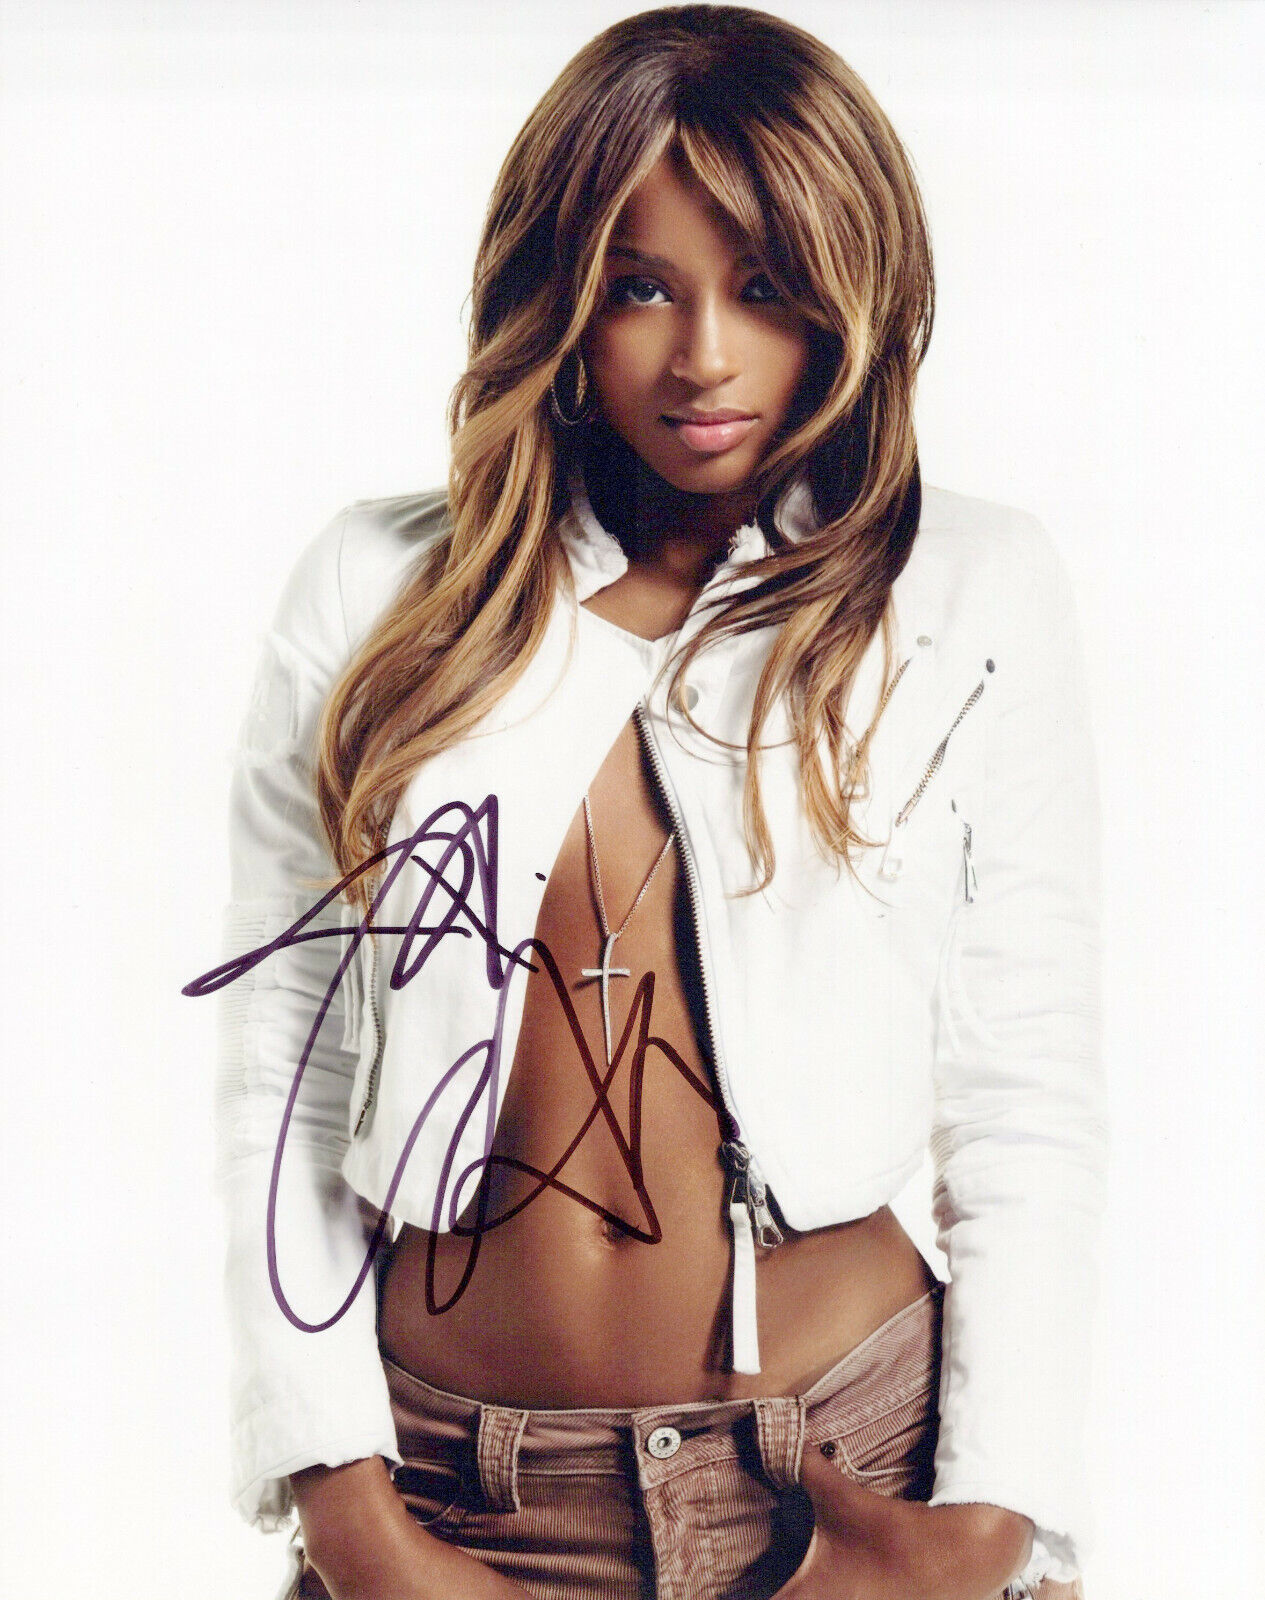 Ciara glamour shot autographed Photo Poster painting signed 8X10 #6